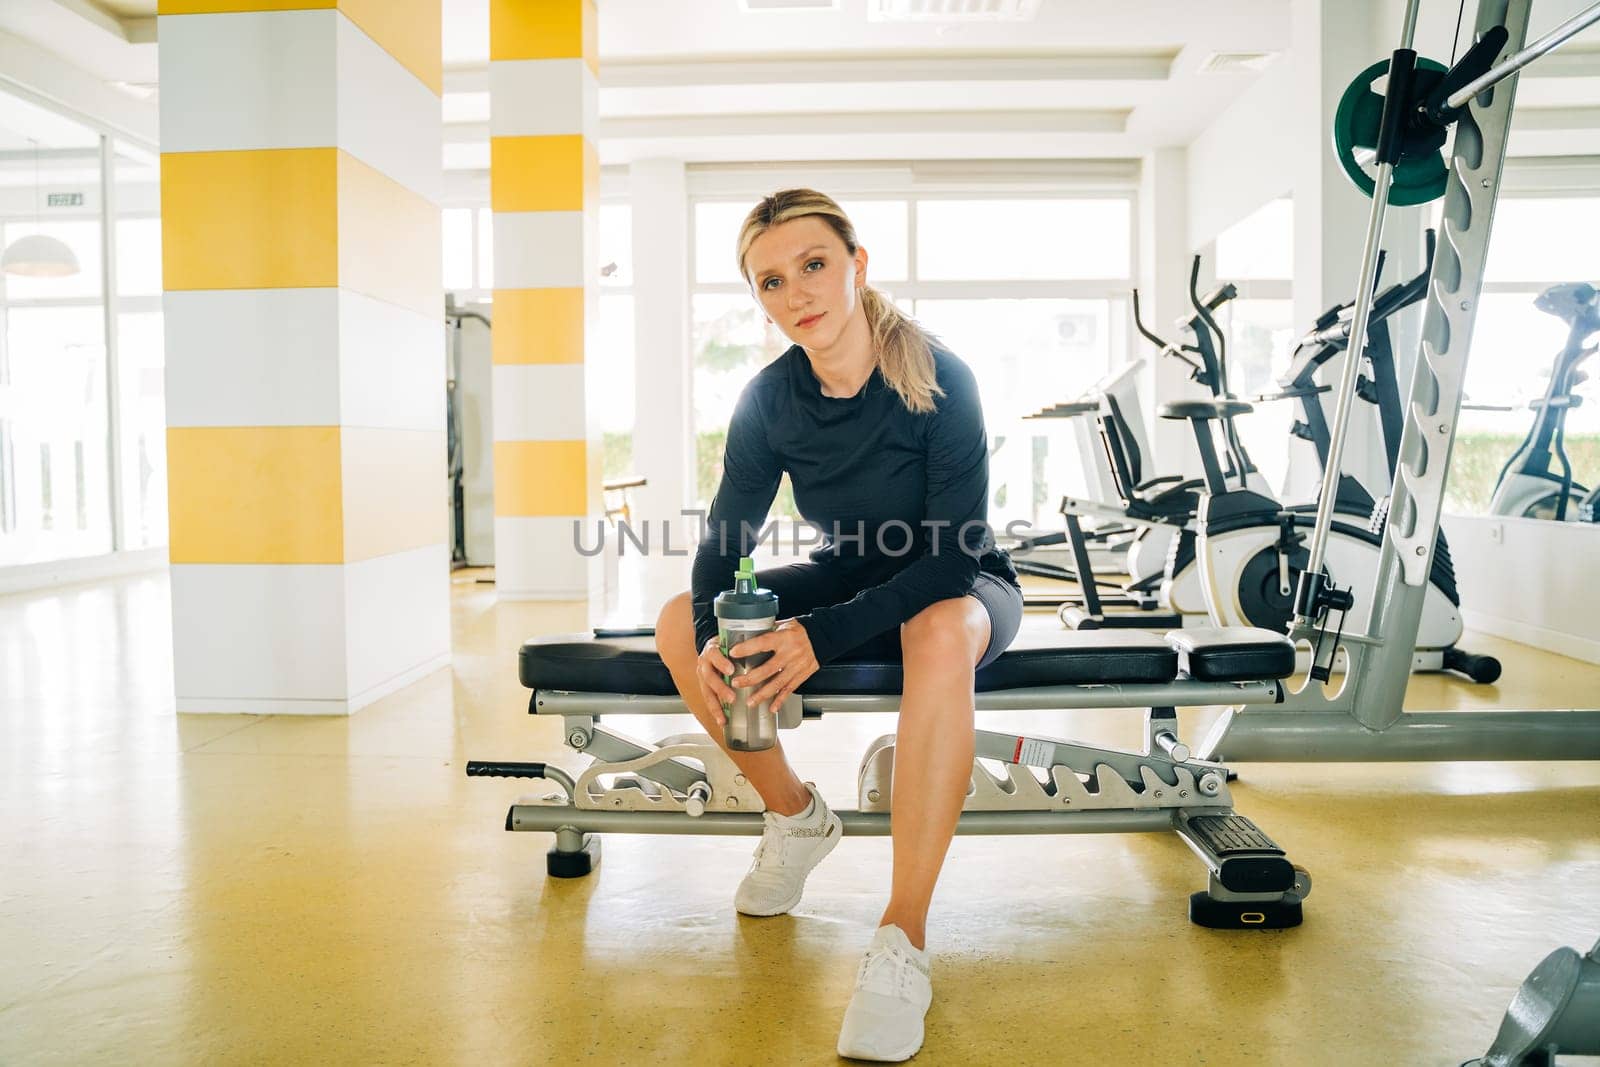 Relaxing after workout. Beautiful young woman sitting on bench at gym. Young sport woman at gym taking a break from training and drinking water